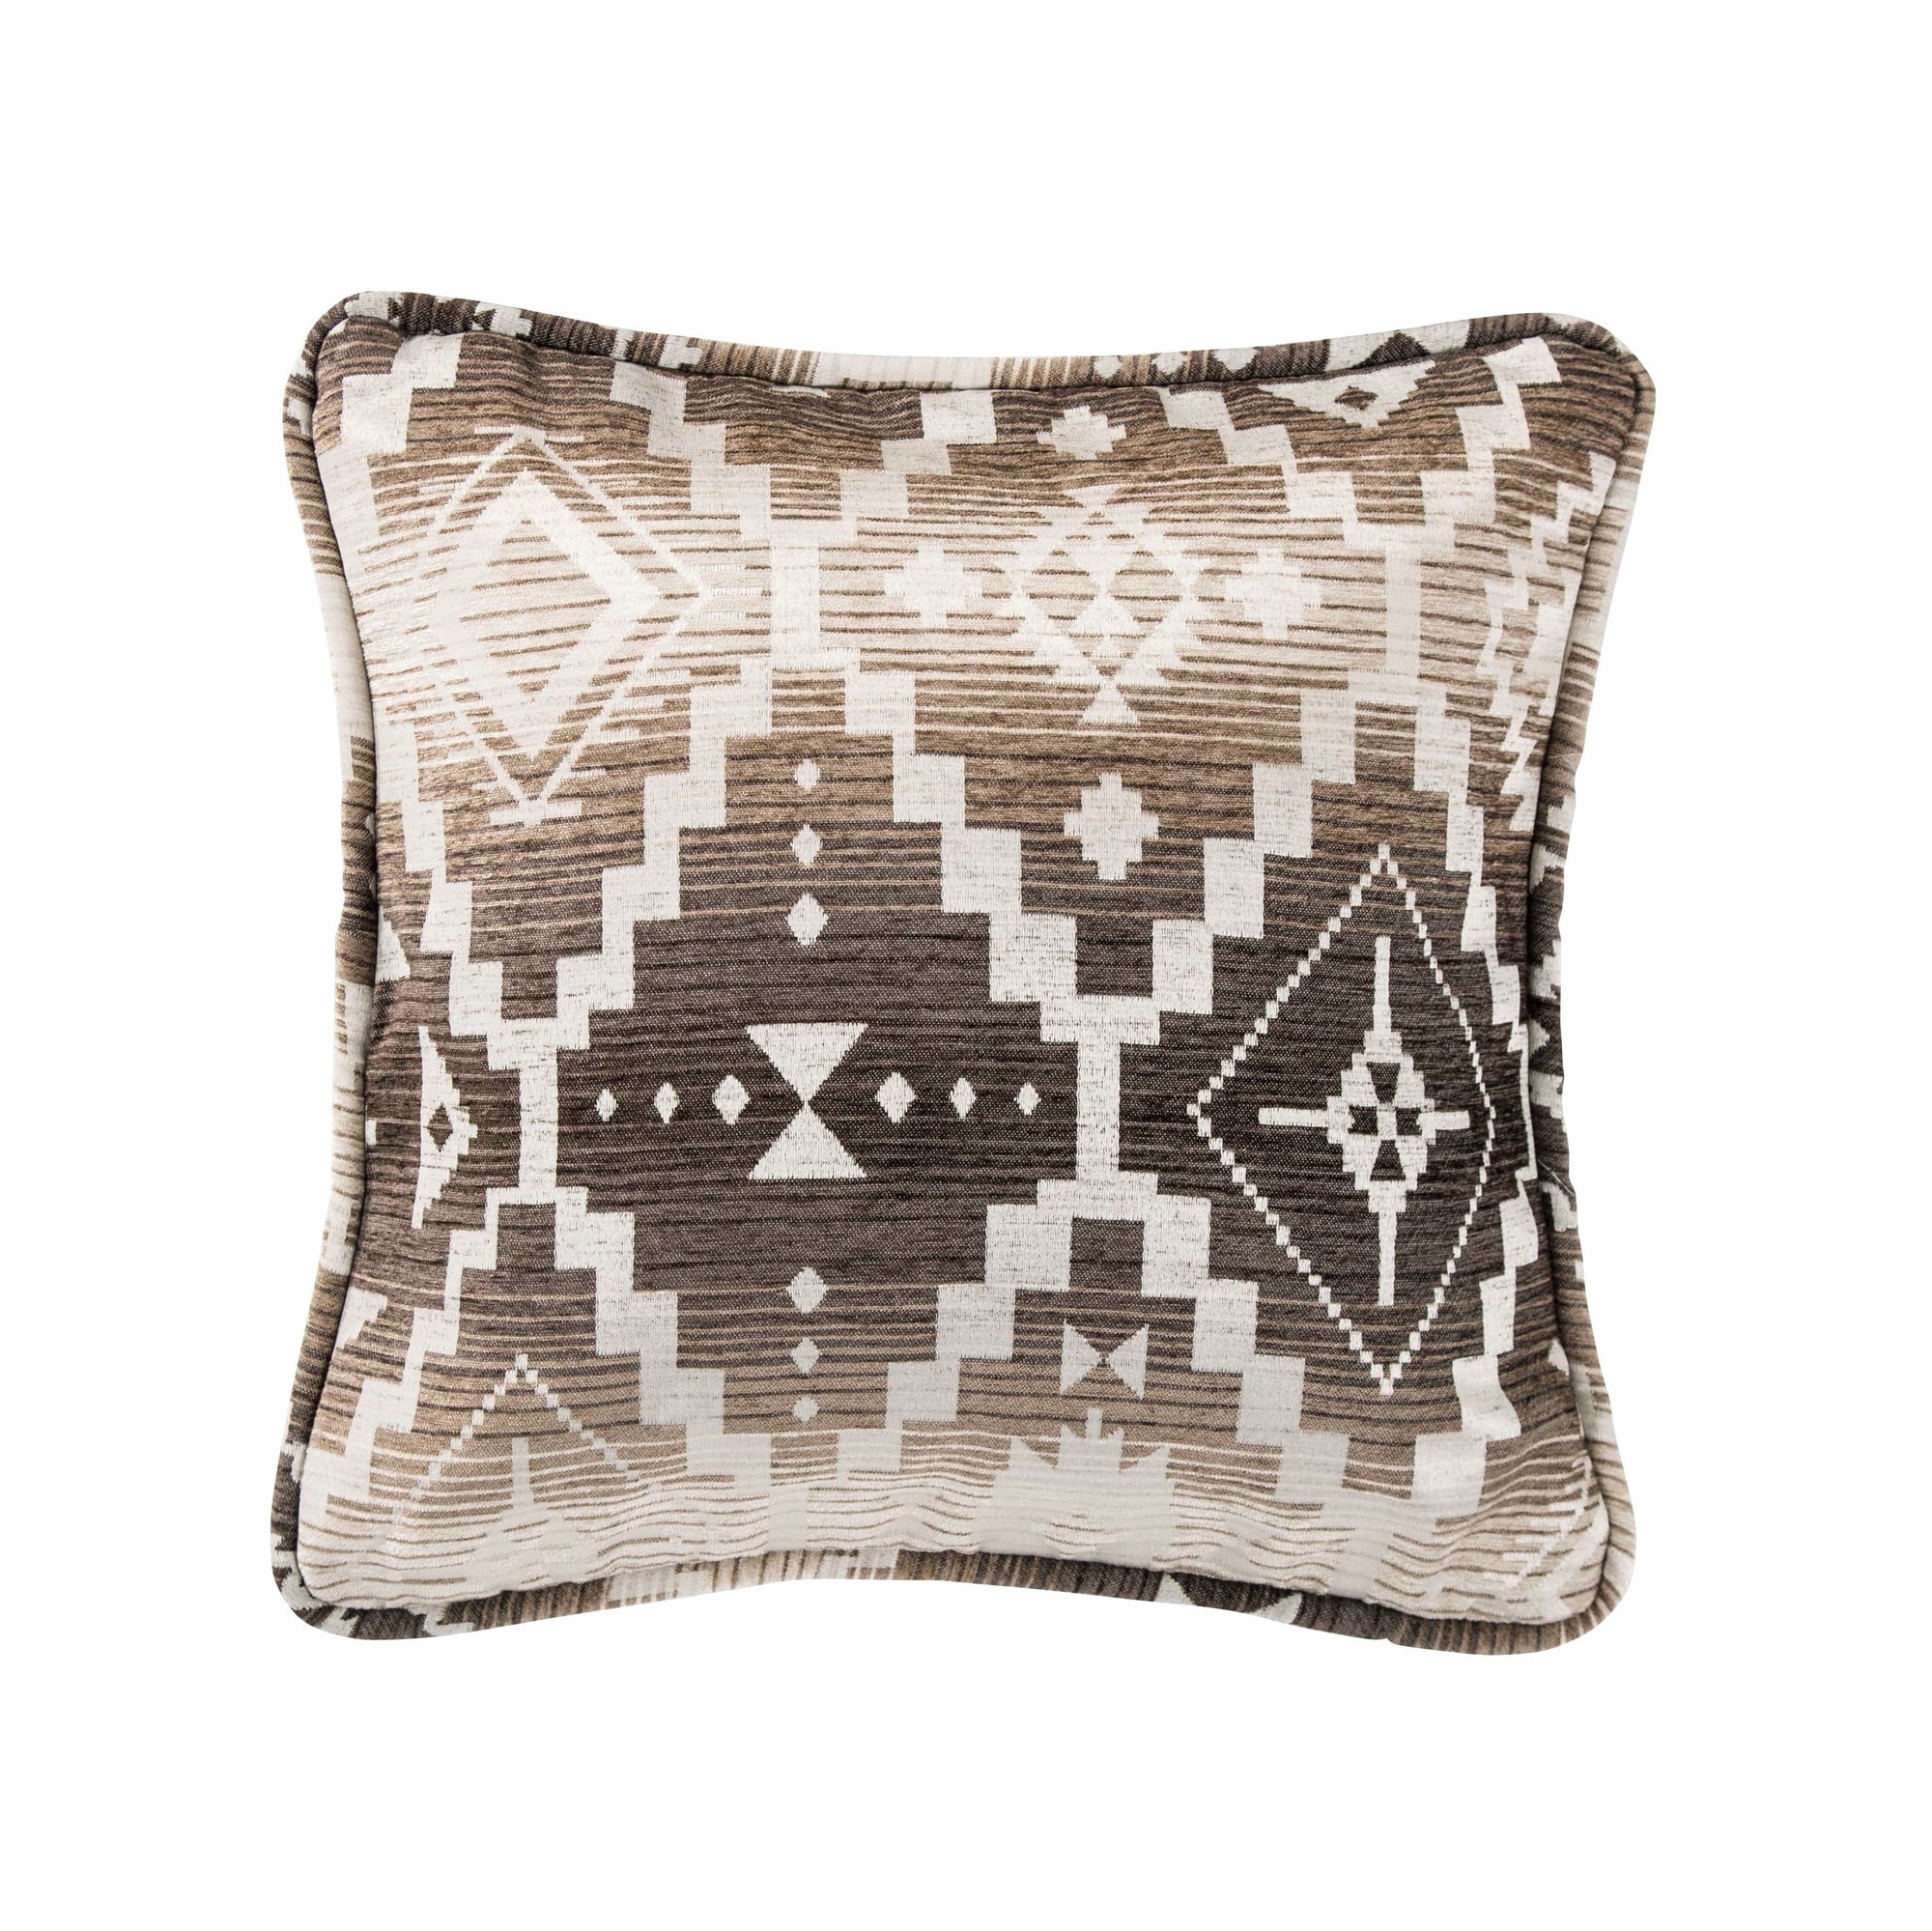 https://paseoroad.com/cdn/shop/products/paseo-road-pillow-chalet-square-aztec-throw-pillow-18x18-37486366228696_2000x2000.jpg?v=1662804923